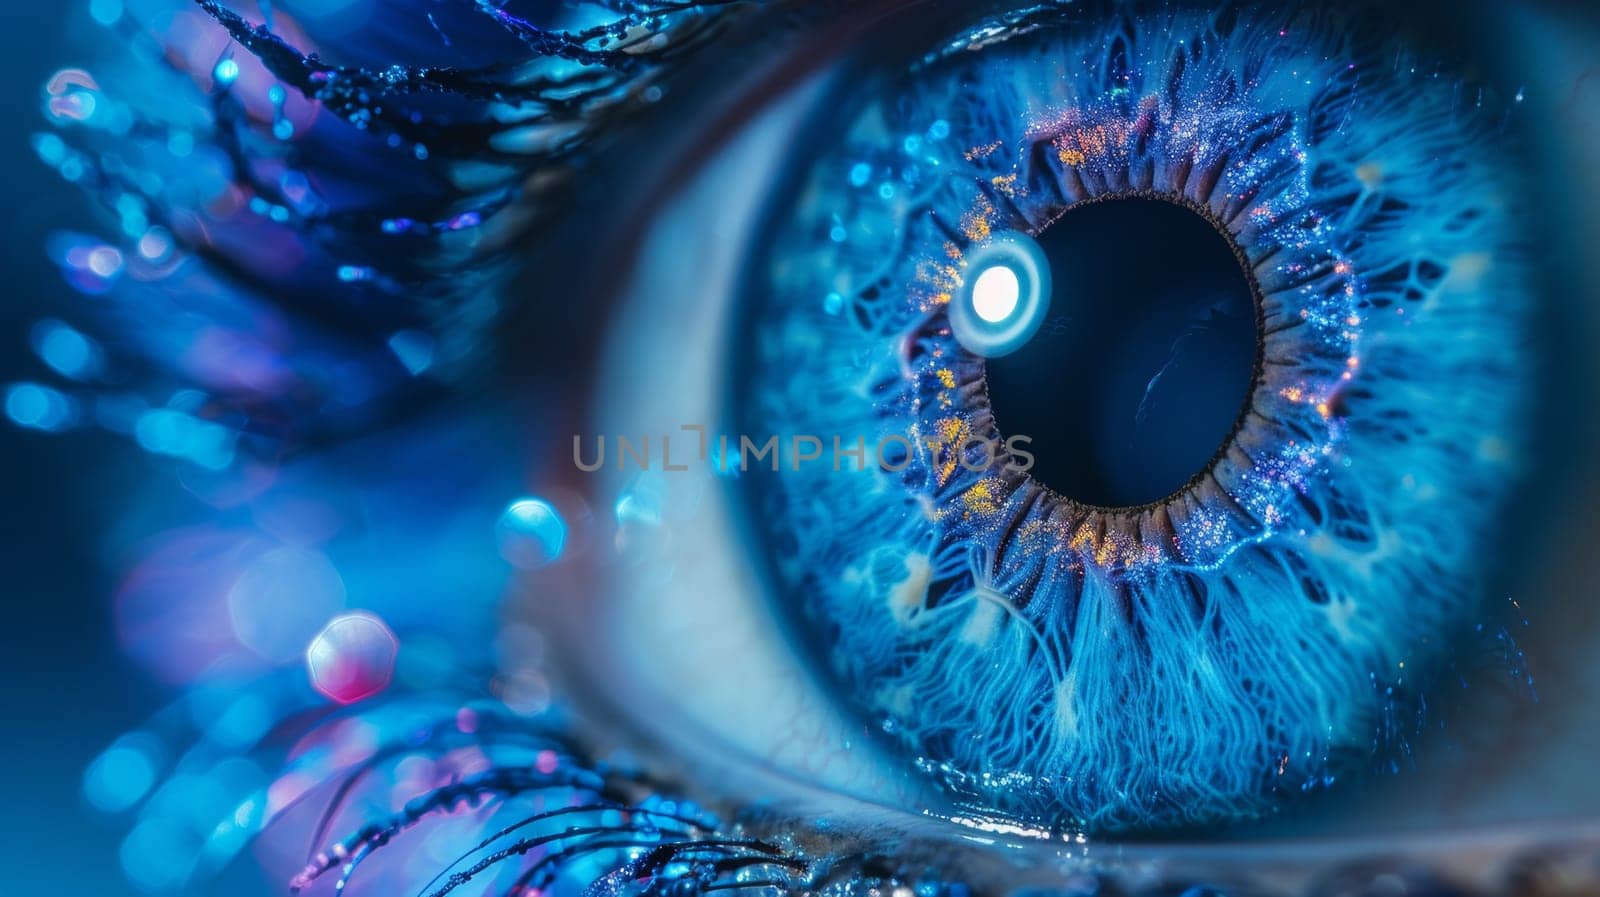 A close up of a blue eye with sparkles in it